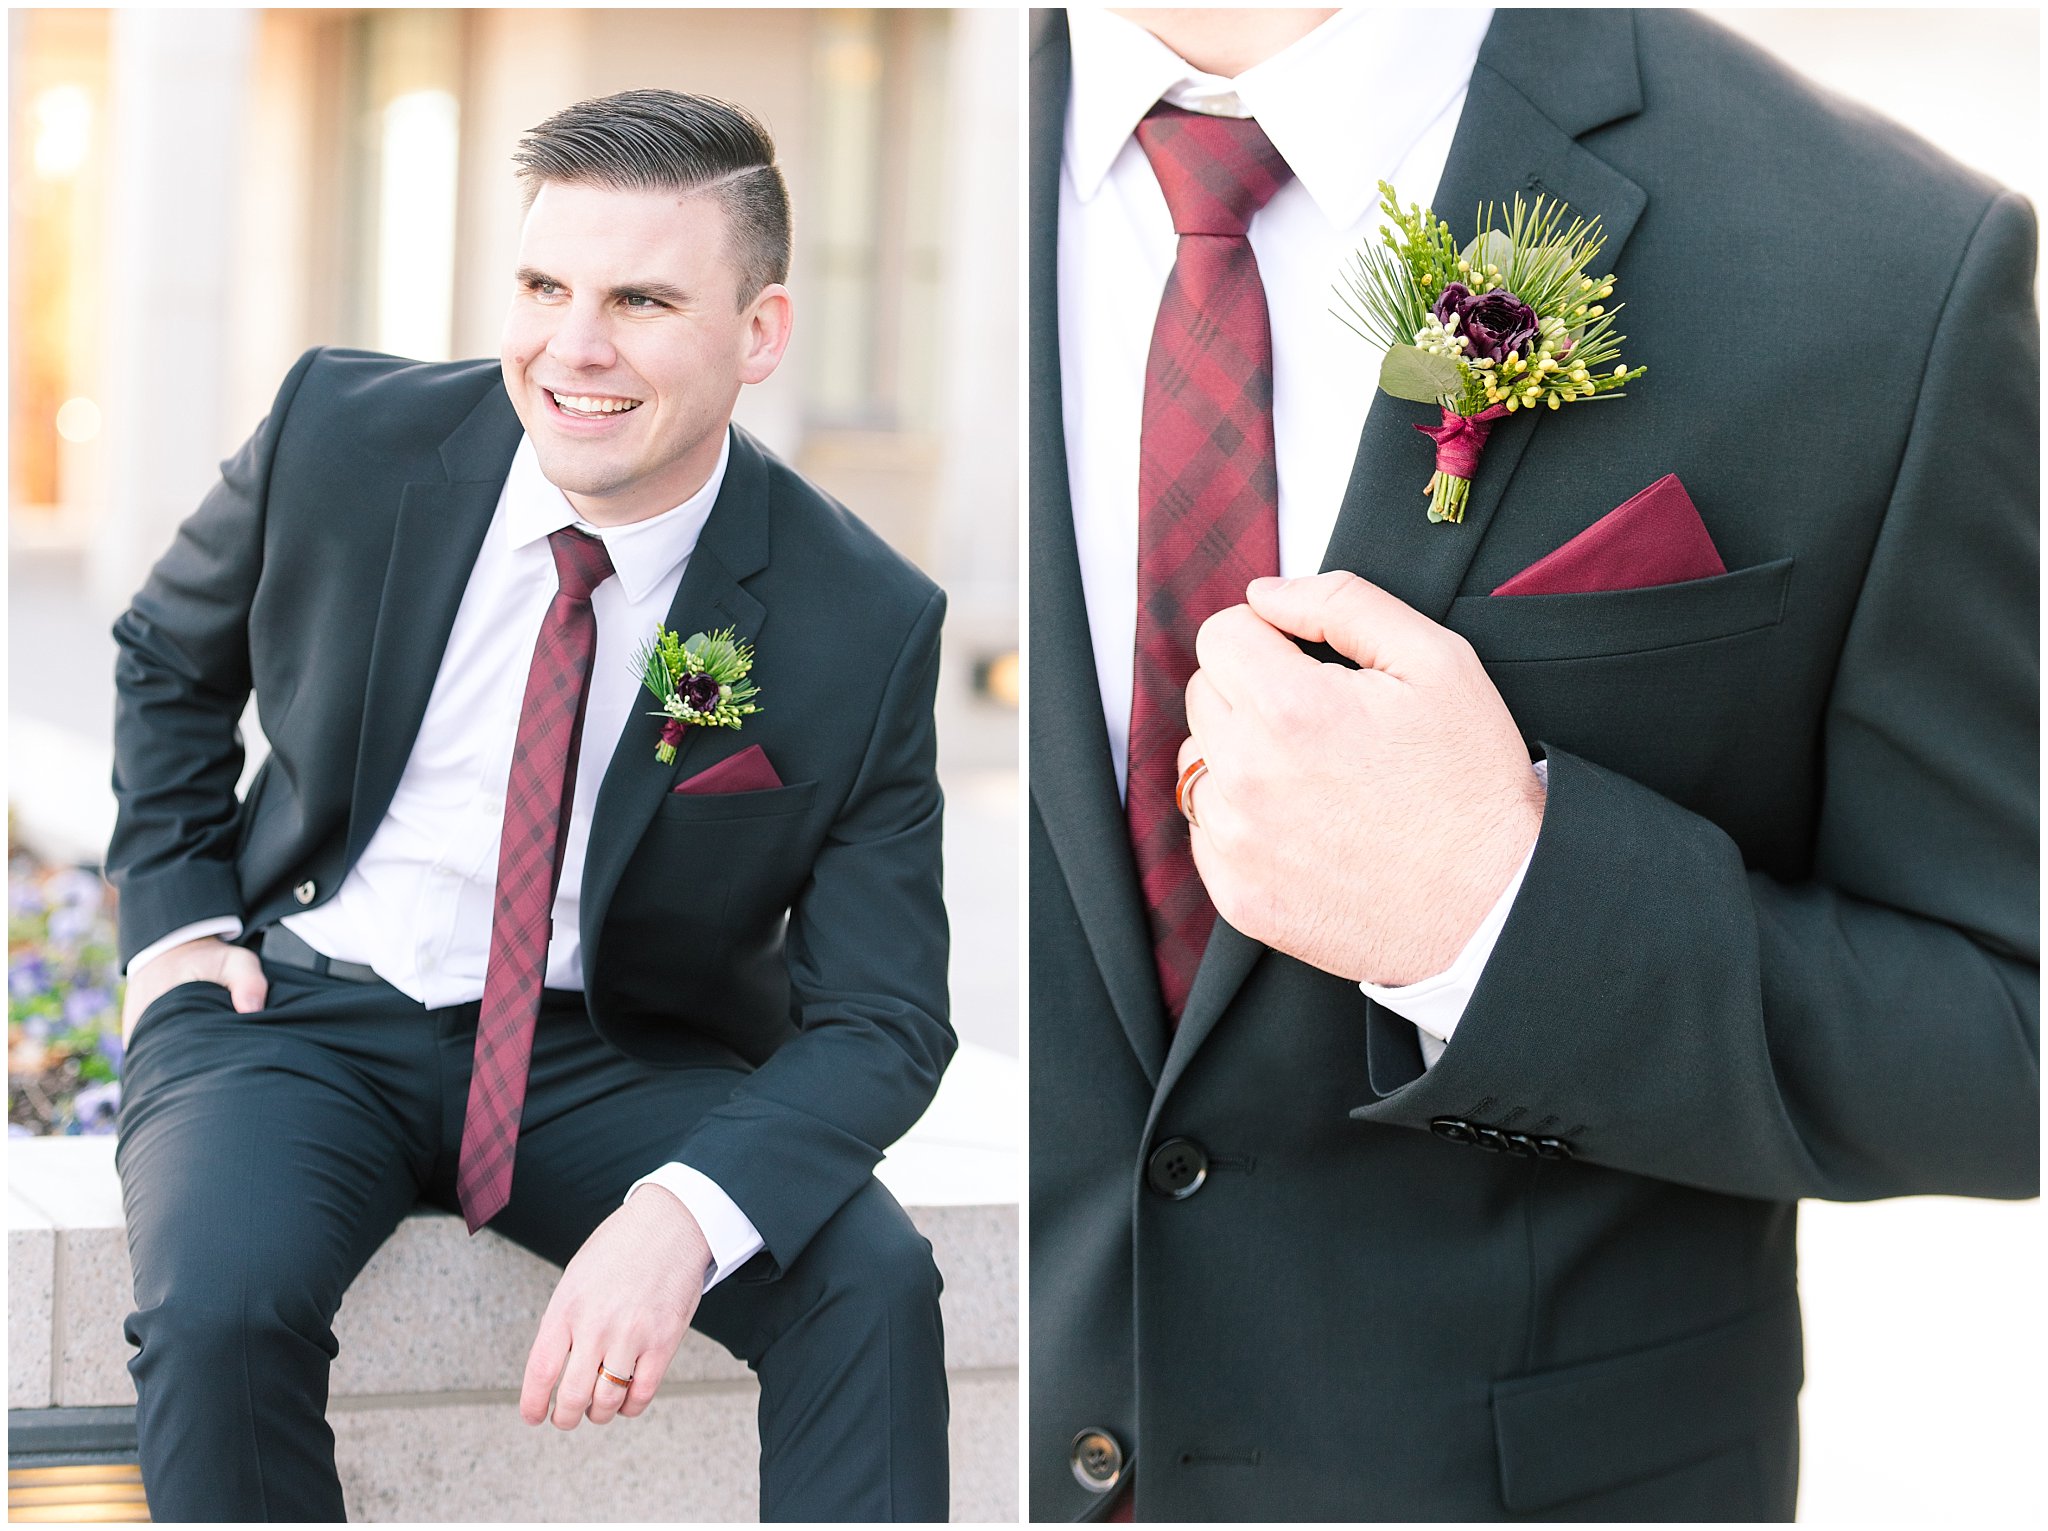 groom portraits with black suit and red tie at the Oquirrh Mountain Temple | Oquirrh Mountain Temple and Gardner Village Wedding | The Gathering Place | Jessie and Dallin Photography